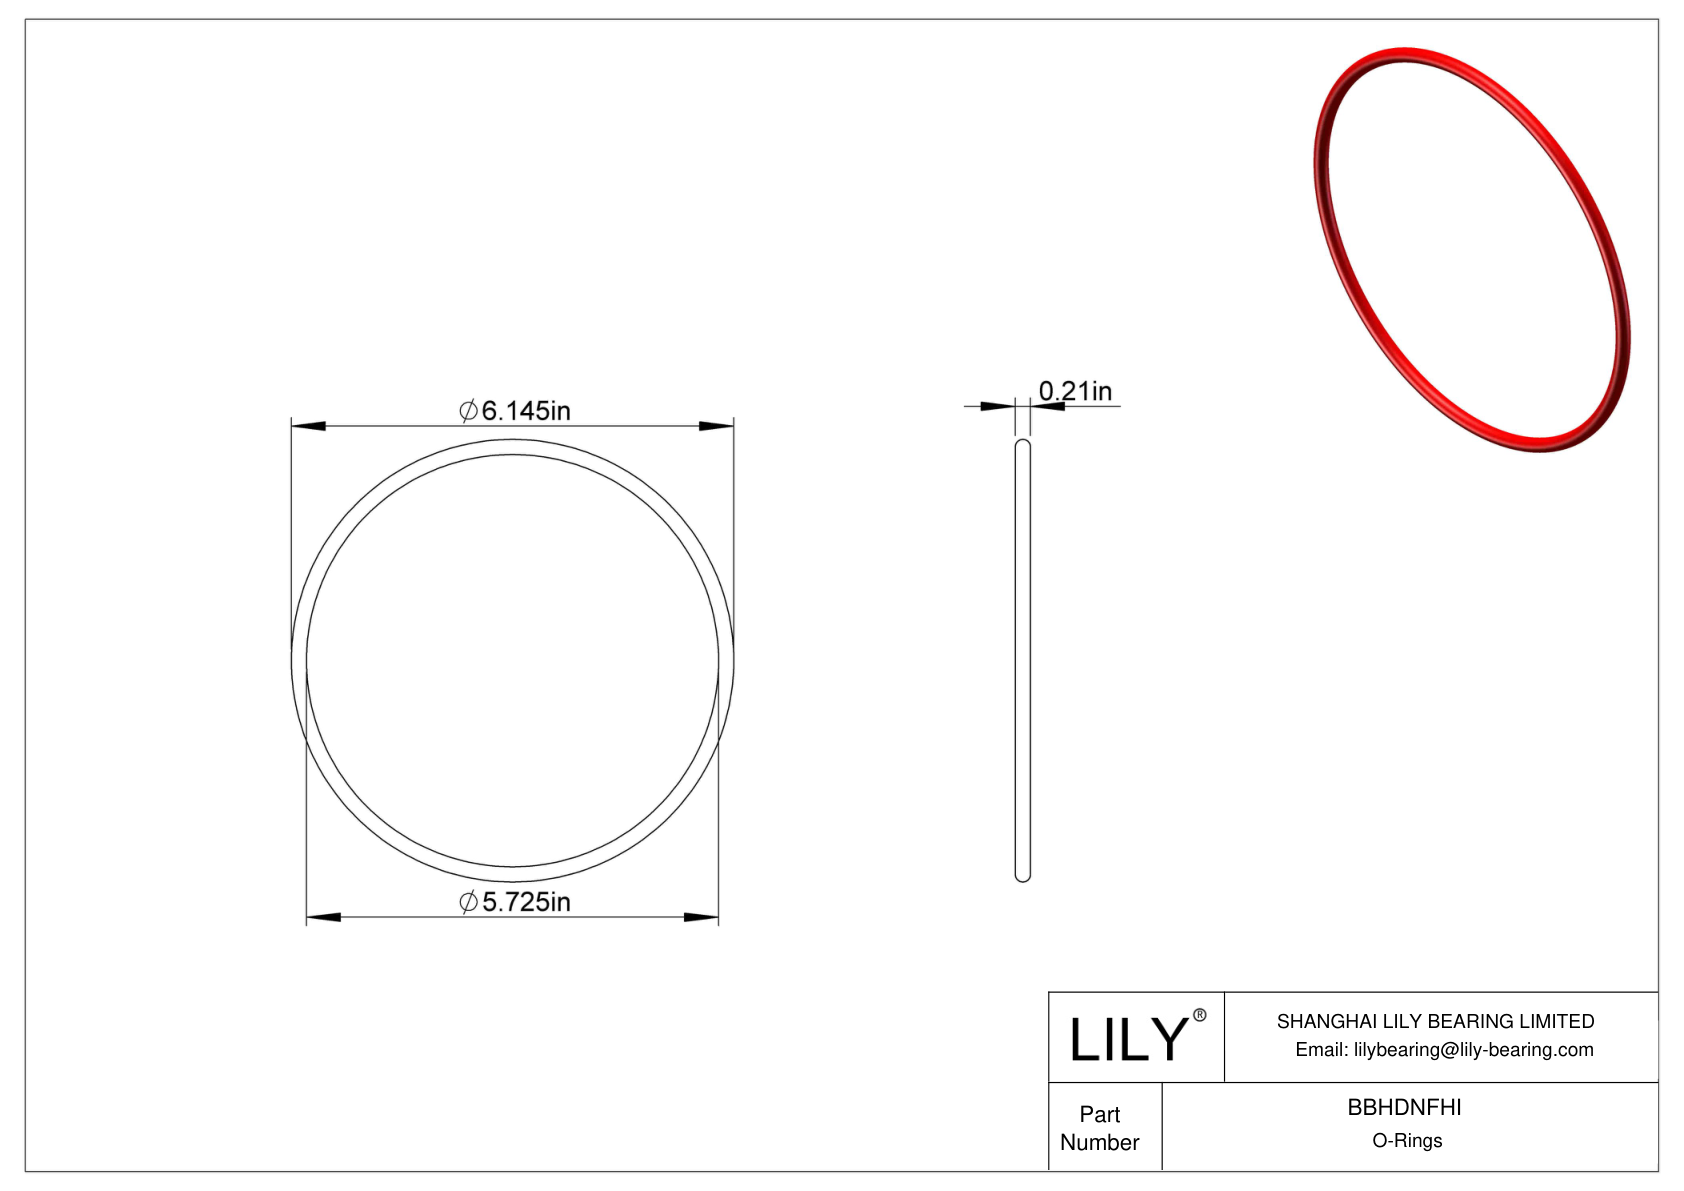 BBHDNFHI High Temperature O-Rings Round cad drawing